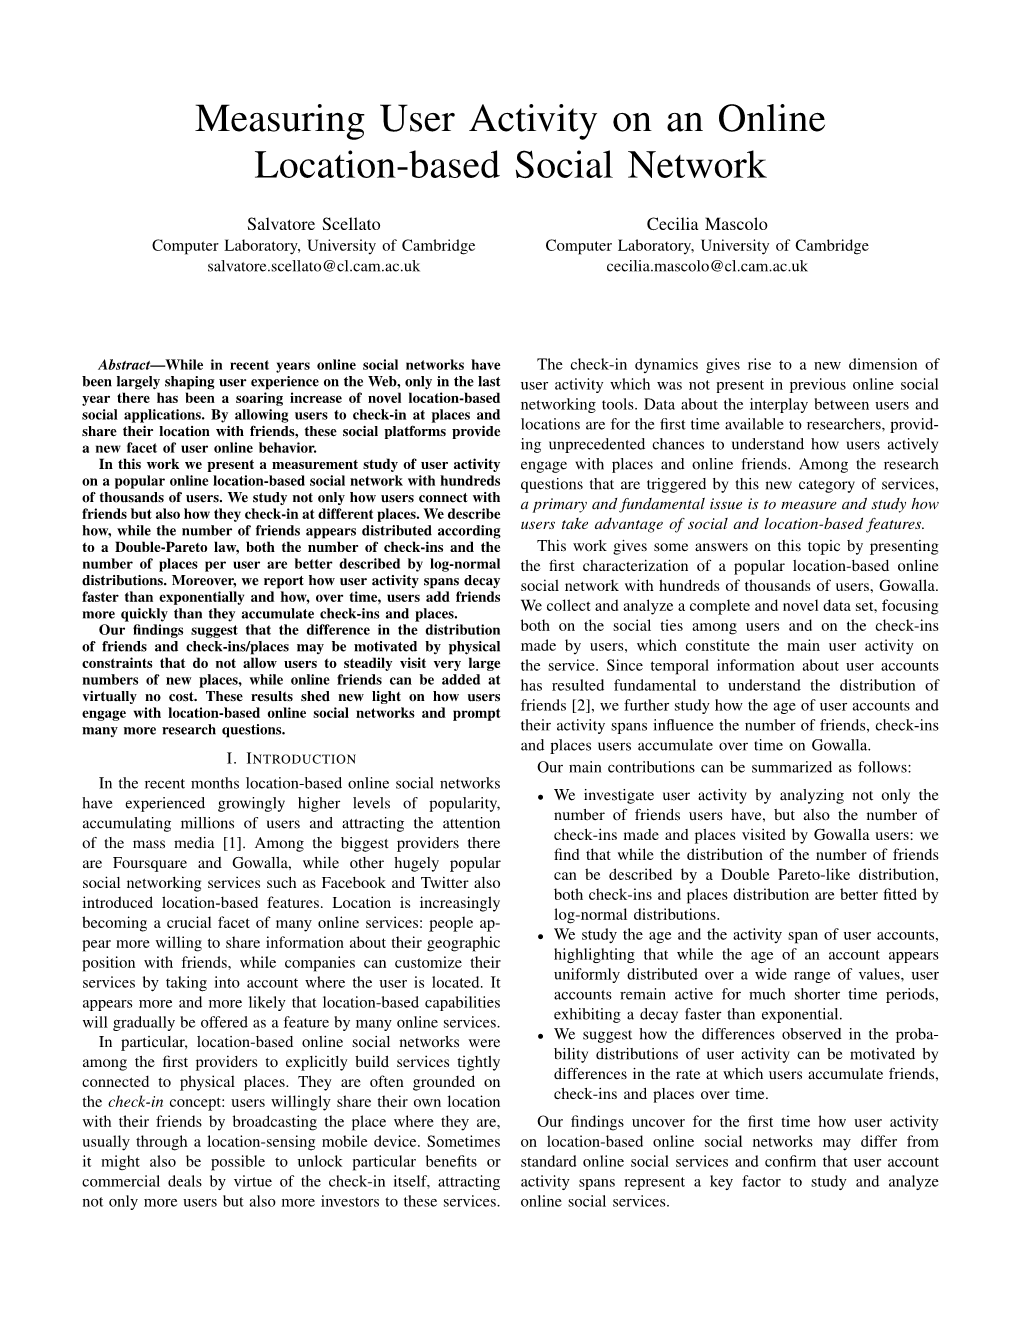 Measuring User Activity on an Online Location-Based Social Network